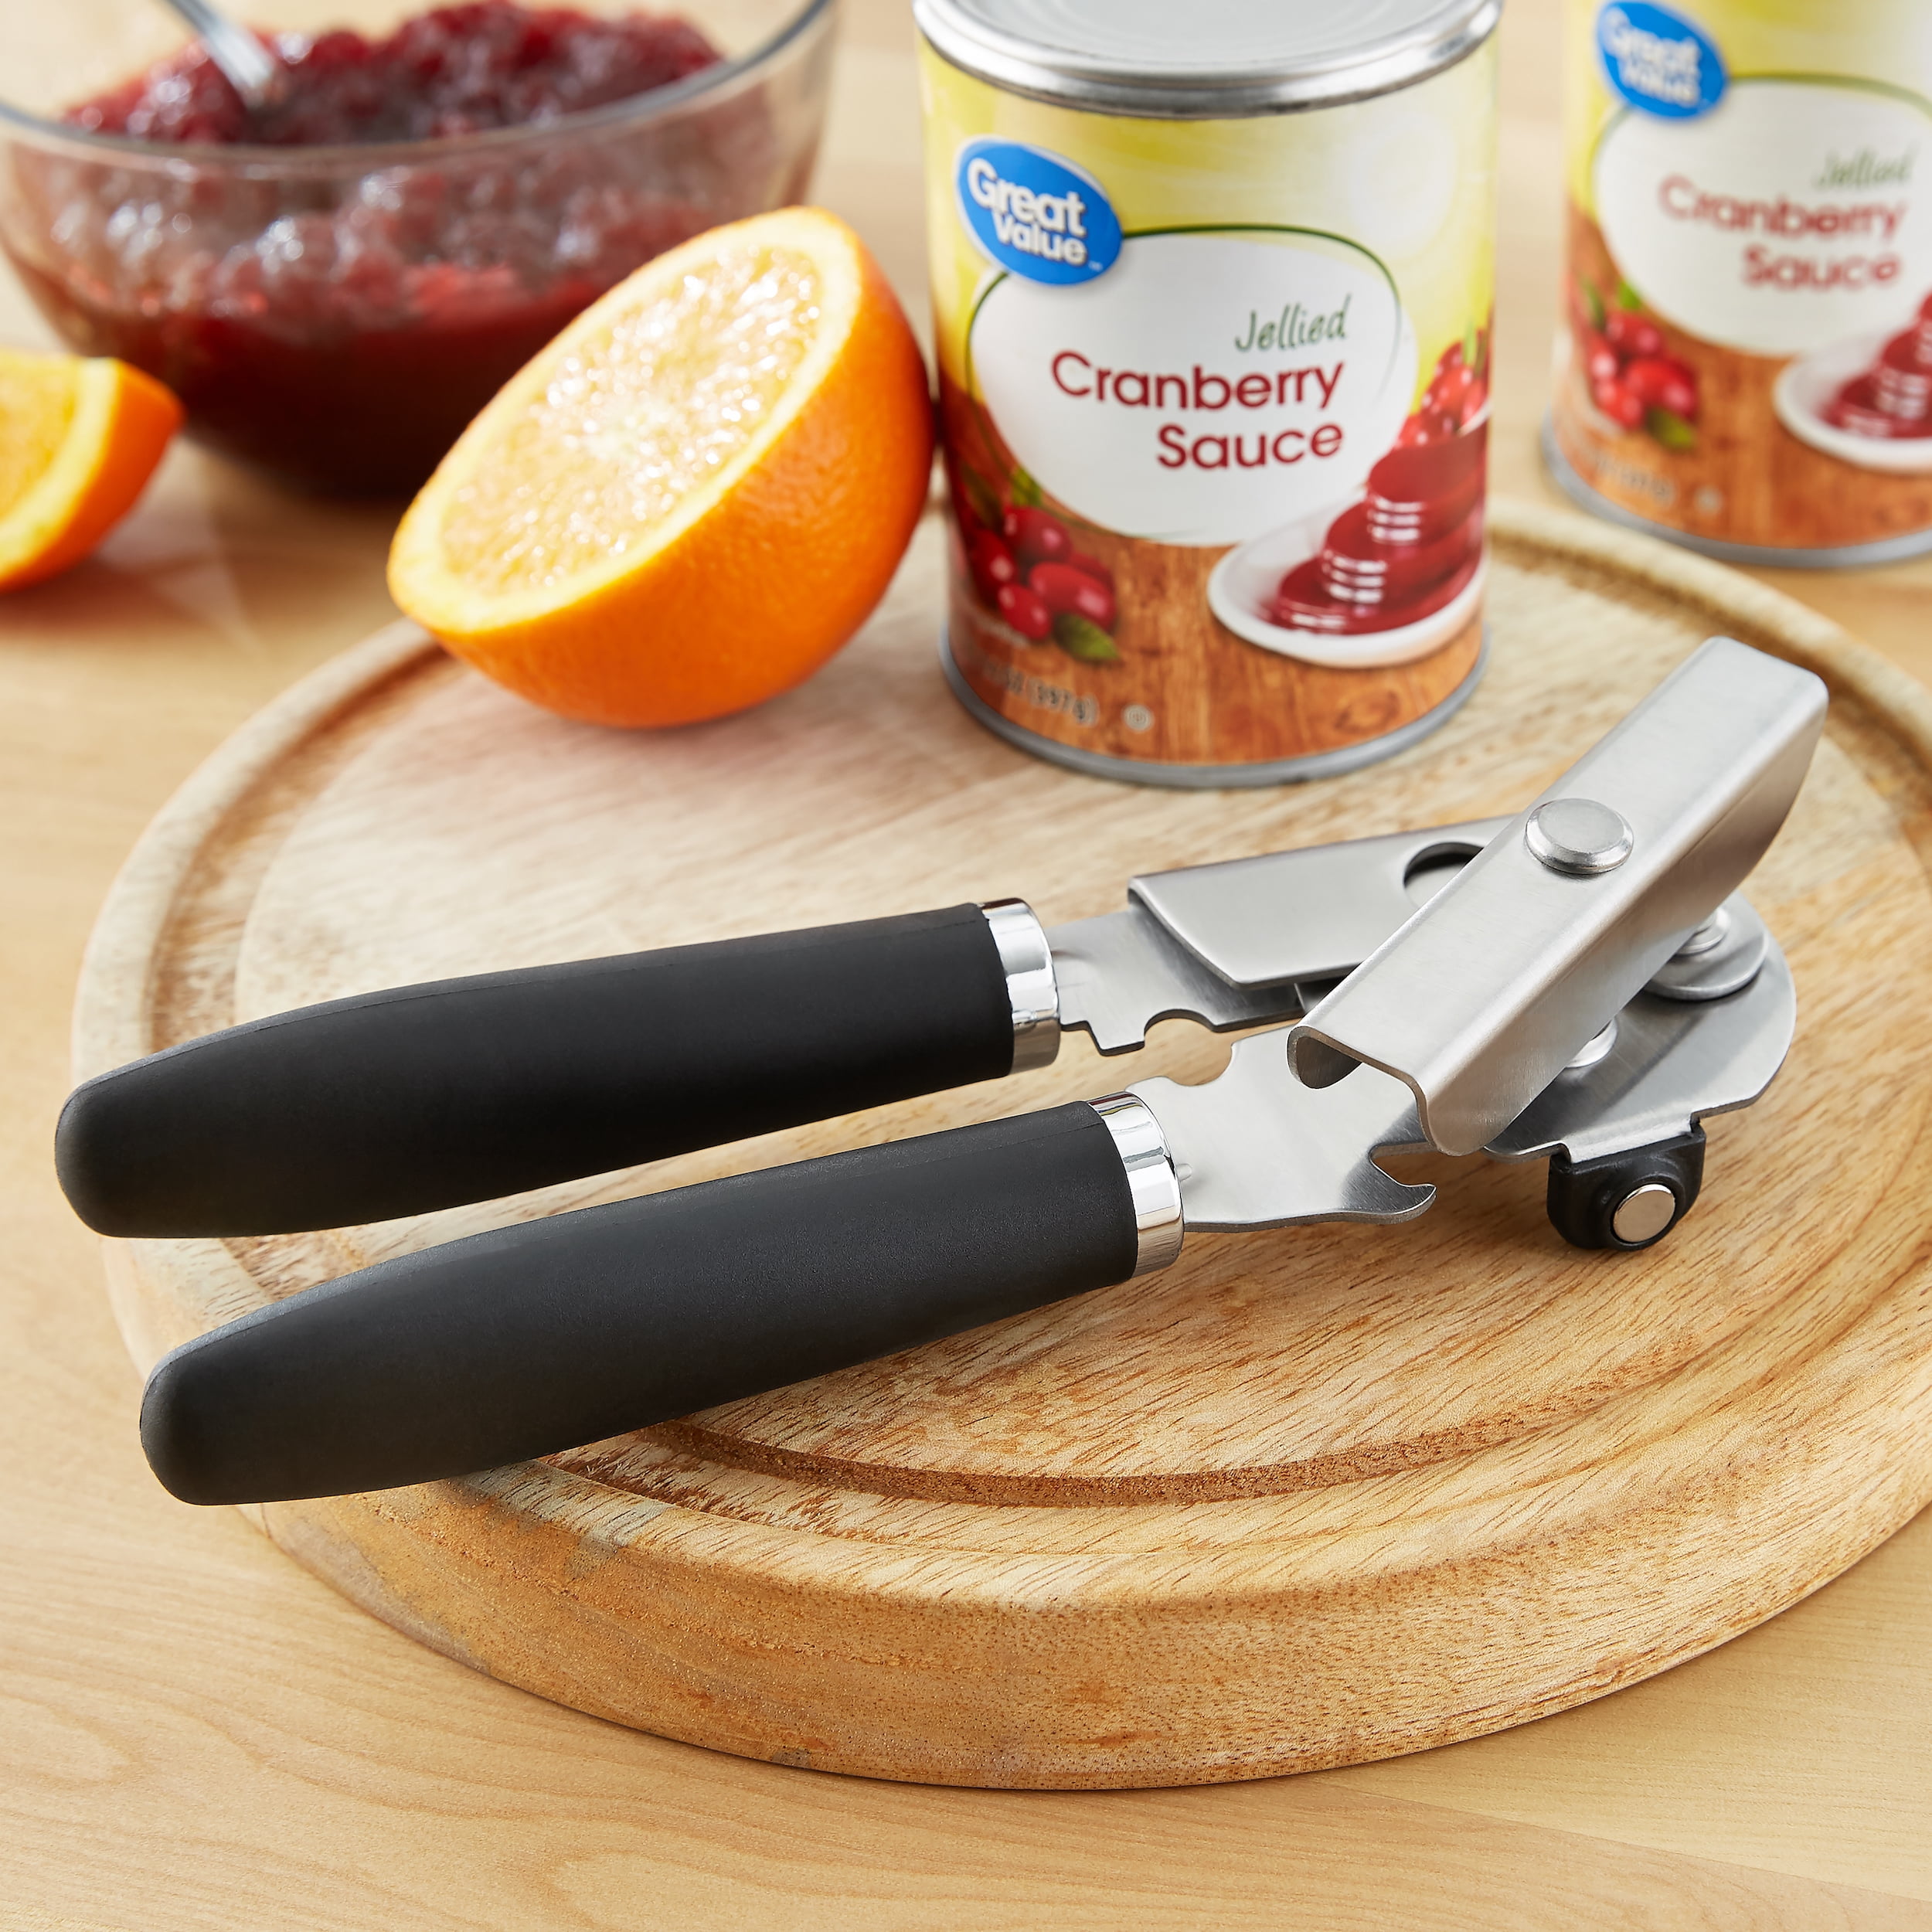 Mainstays Electric Can Opener, Multiple Colors 